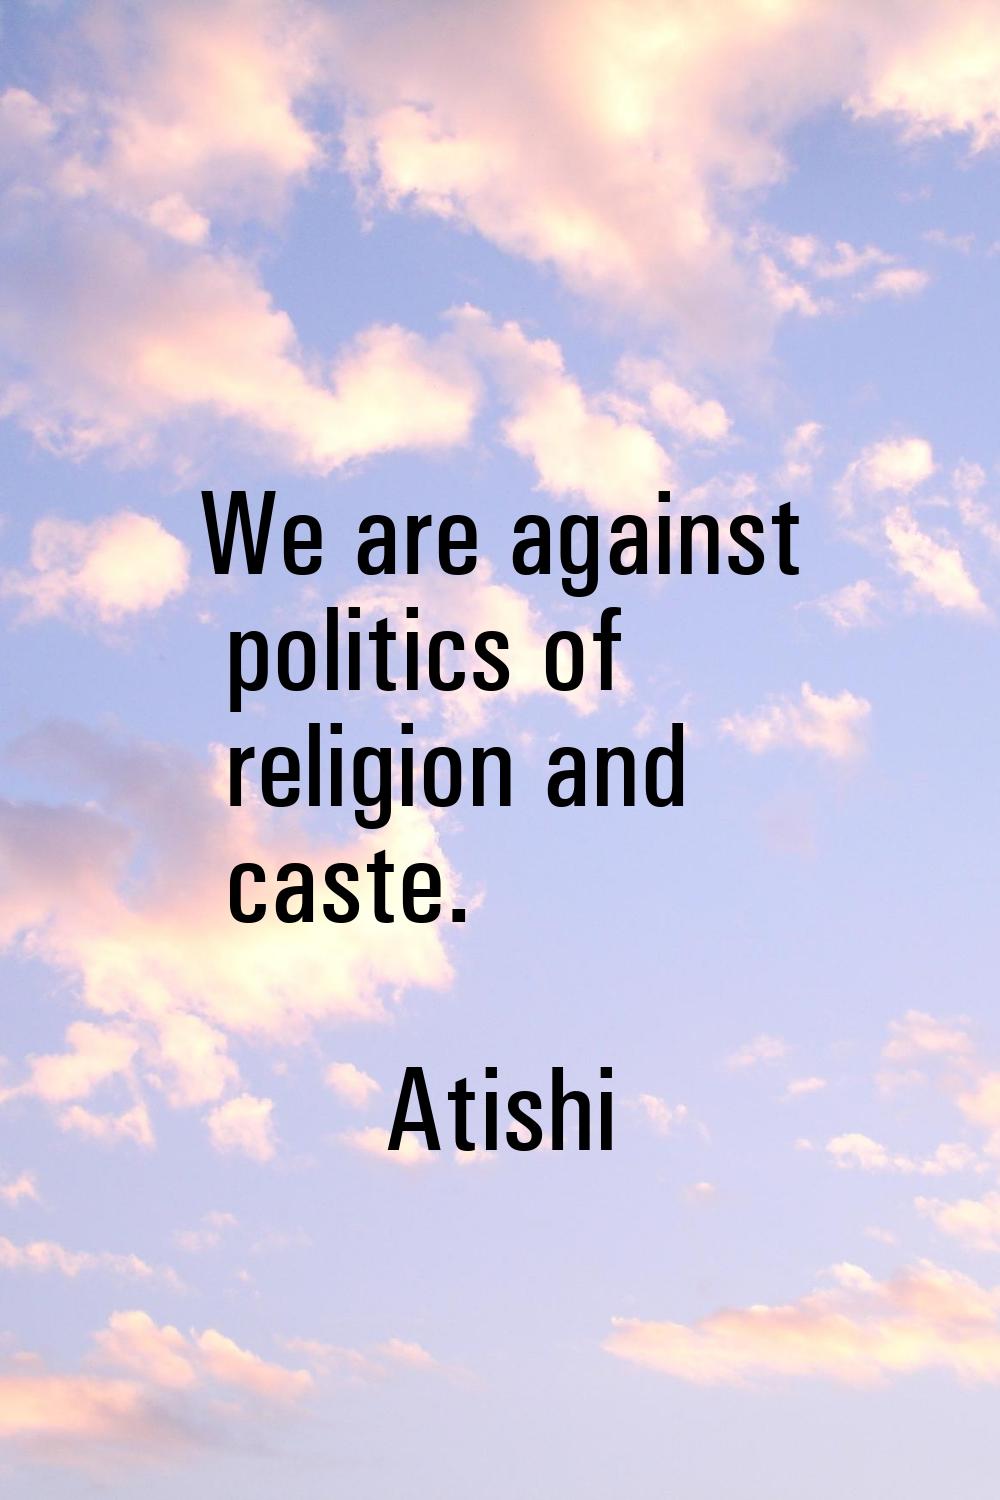 We are against politics of religion and caste.